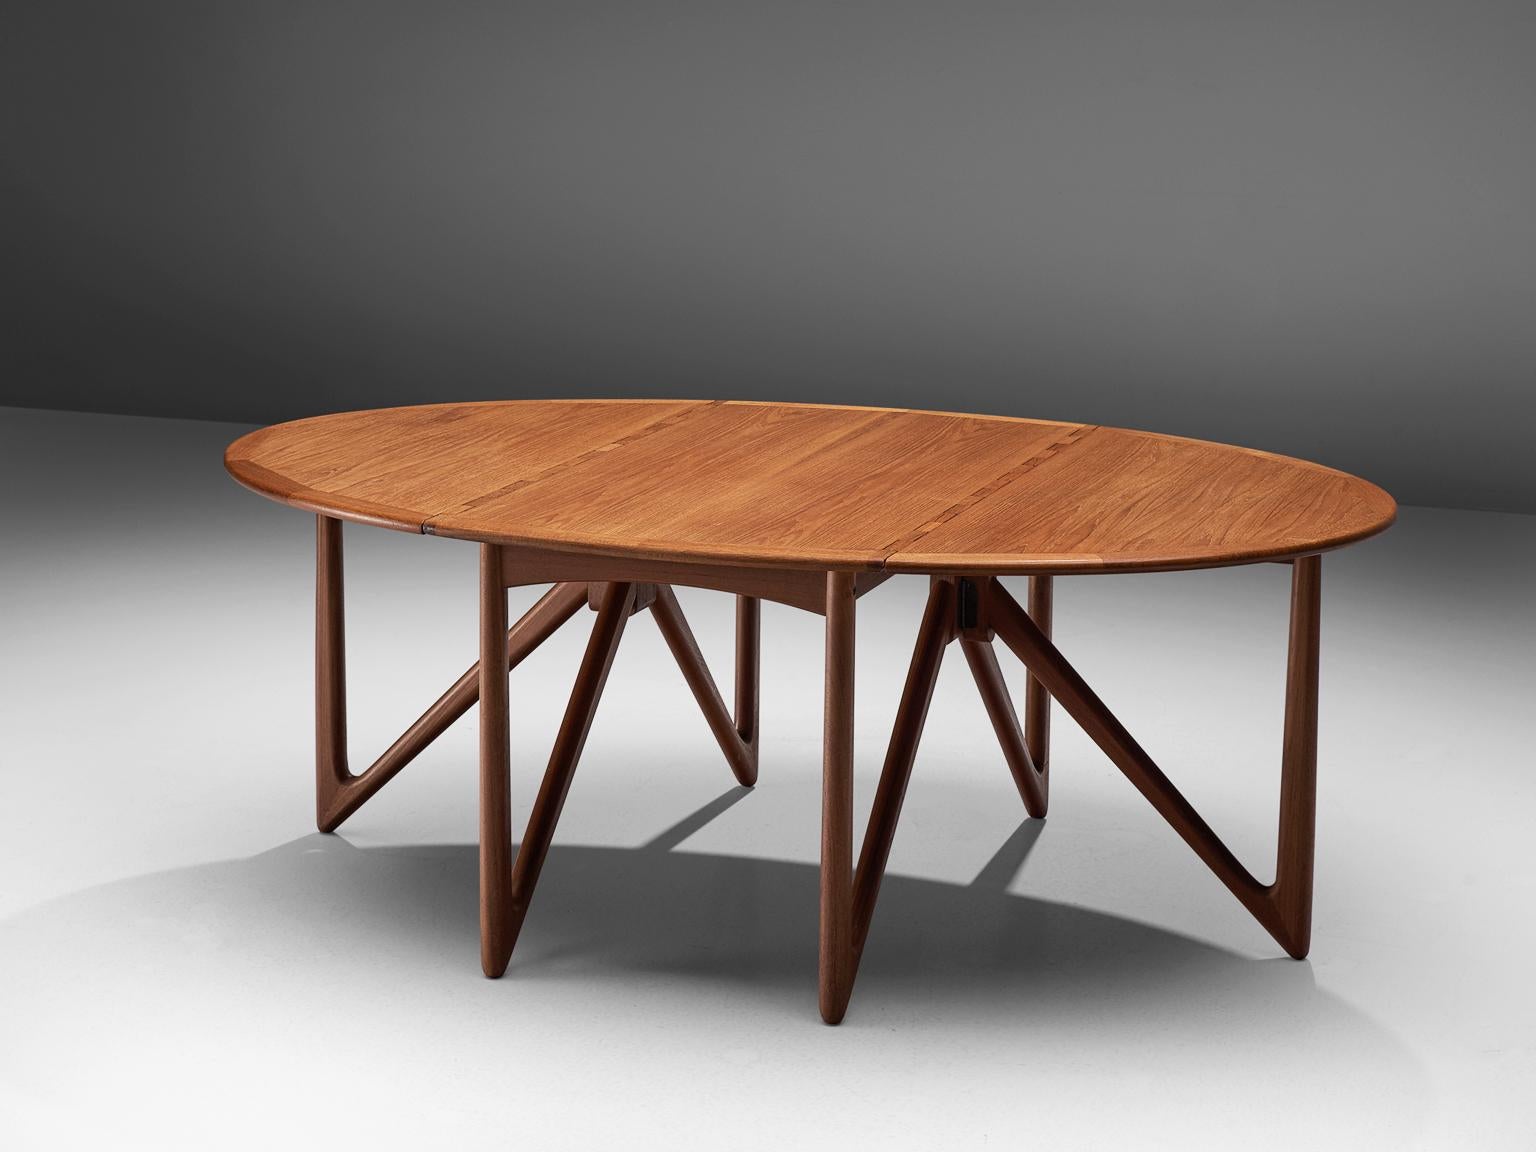 Kurt Østervig for Jason Mobler modern, oval table in teak, Denmark, 1960s.

This rare drop-leaf table shows an unusual, impressive base of six V-shaped legs, made with extraordinary craftsmanship. The clear shape of the oval top nicely contrasts to